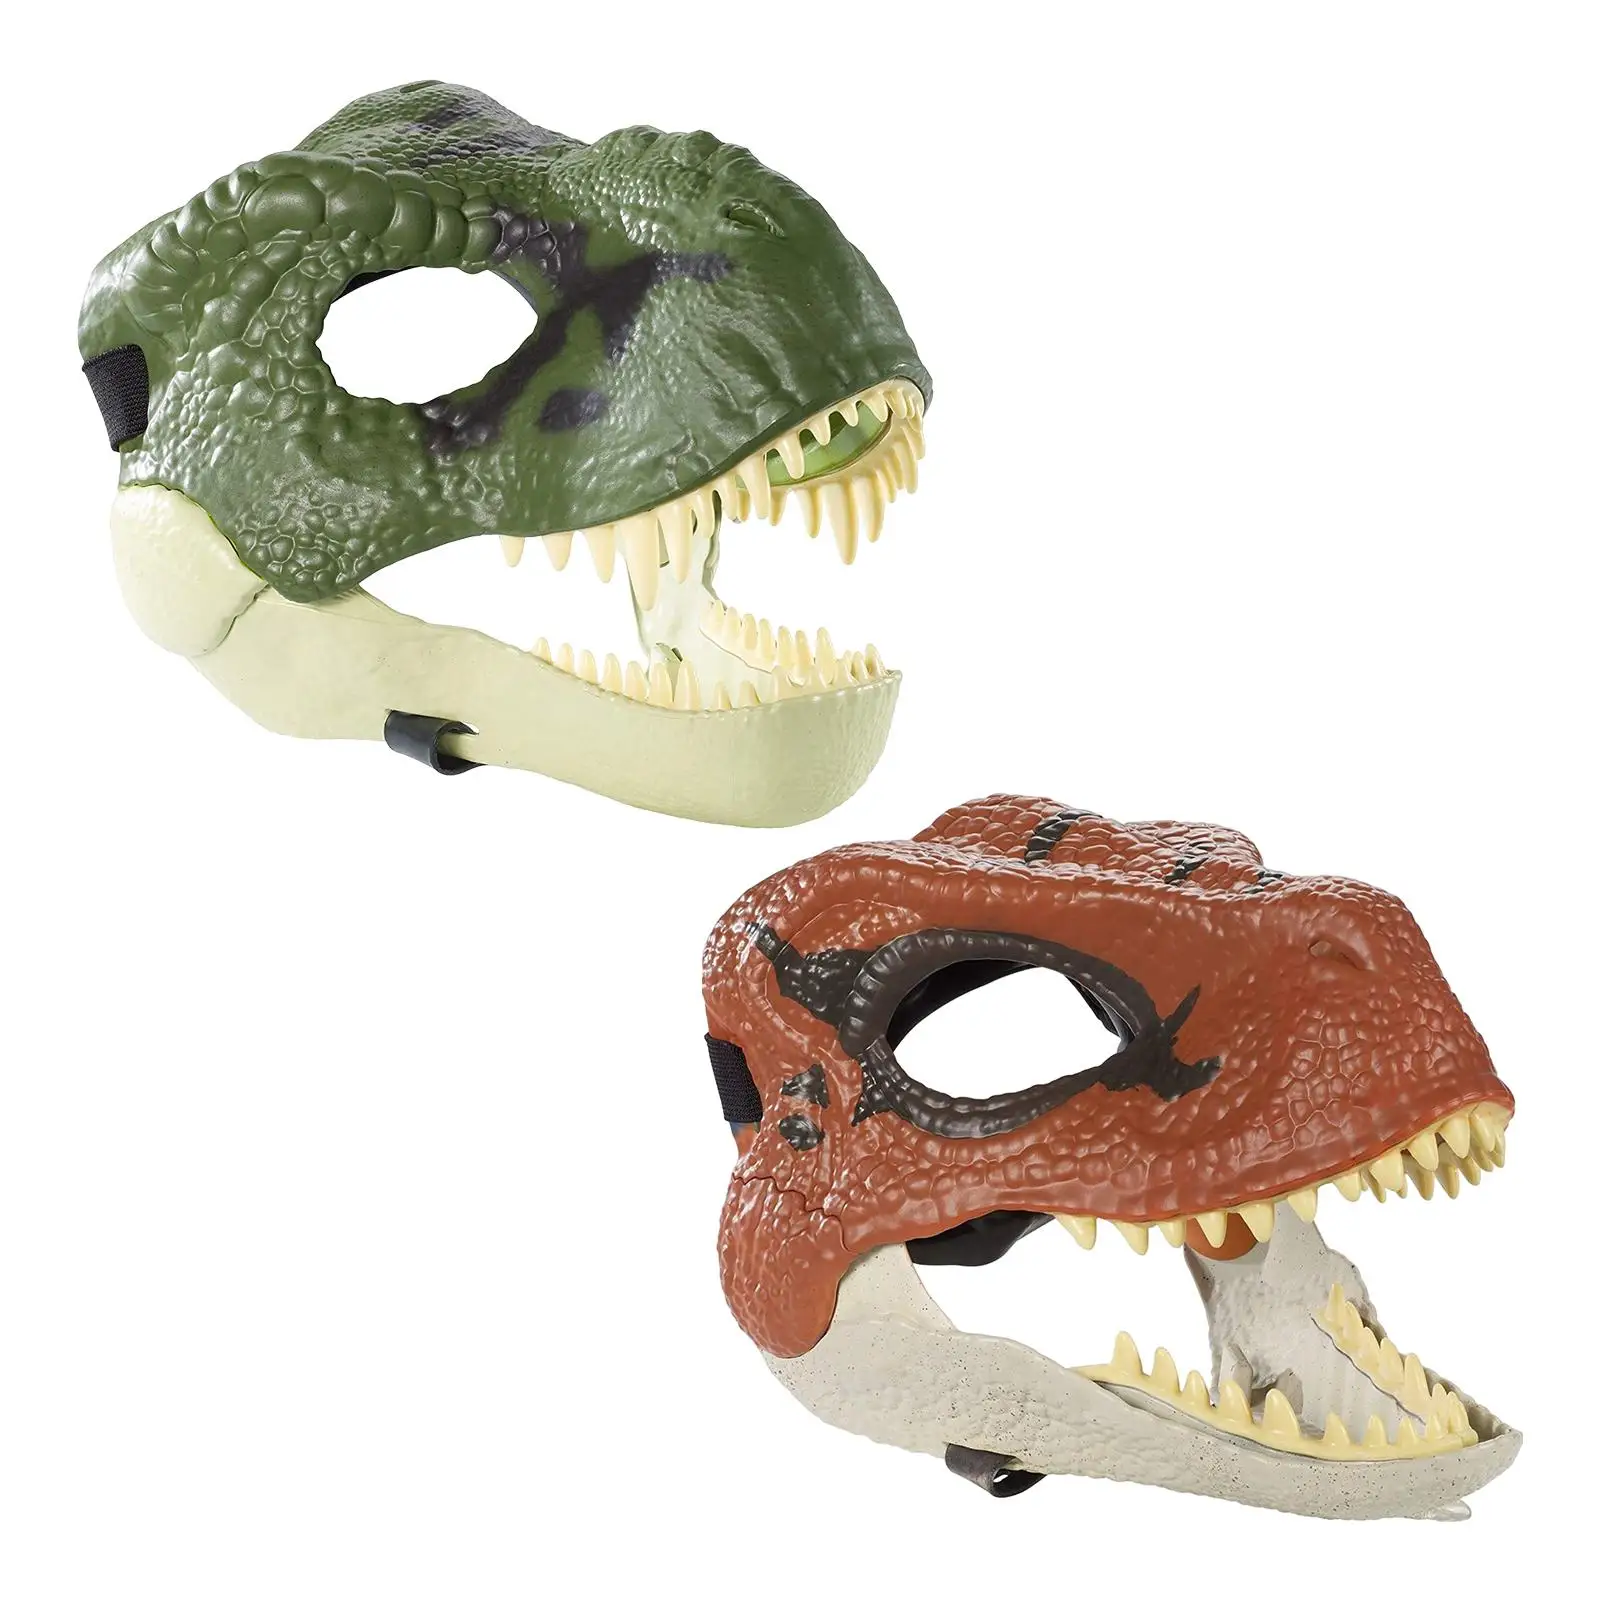 Creative Dinosaur Mask Dinosaur Toy Costume Decor Cosplay Mask Role Play Mask for Festivals Birthday Carnival Party Decoration